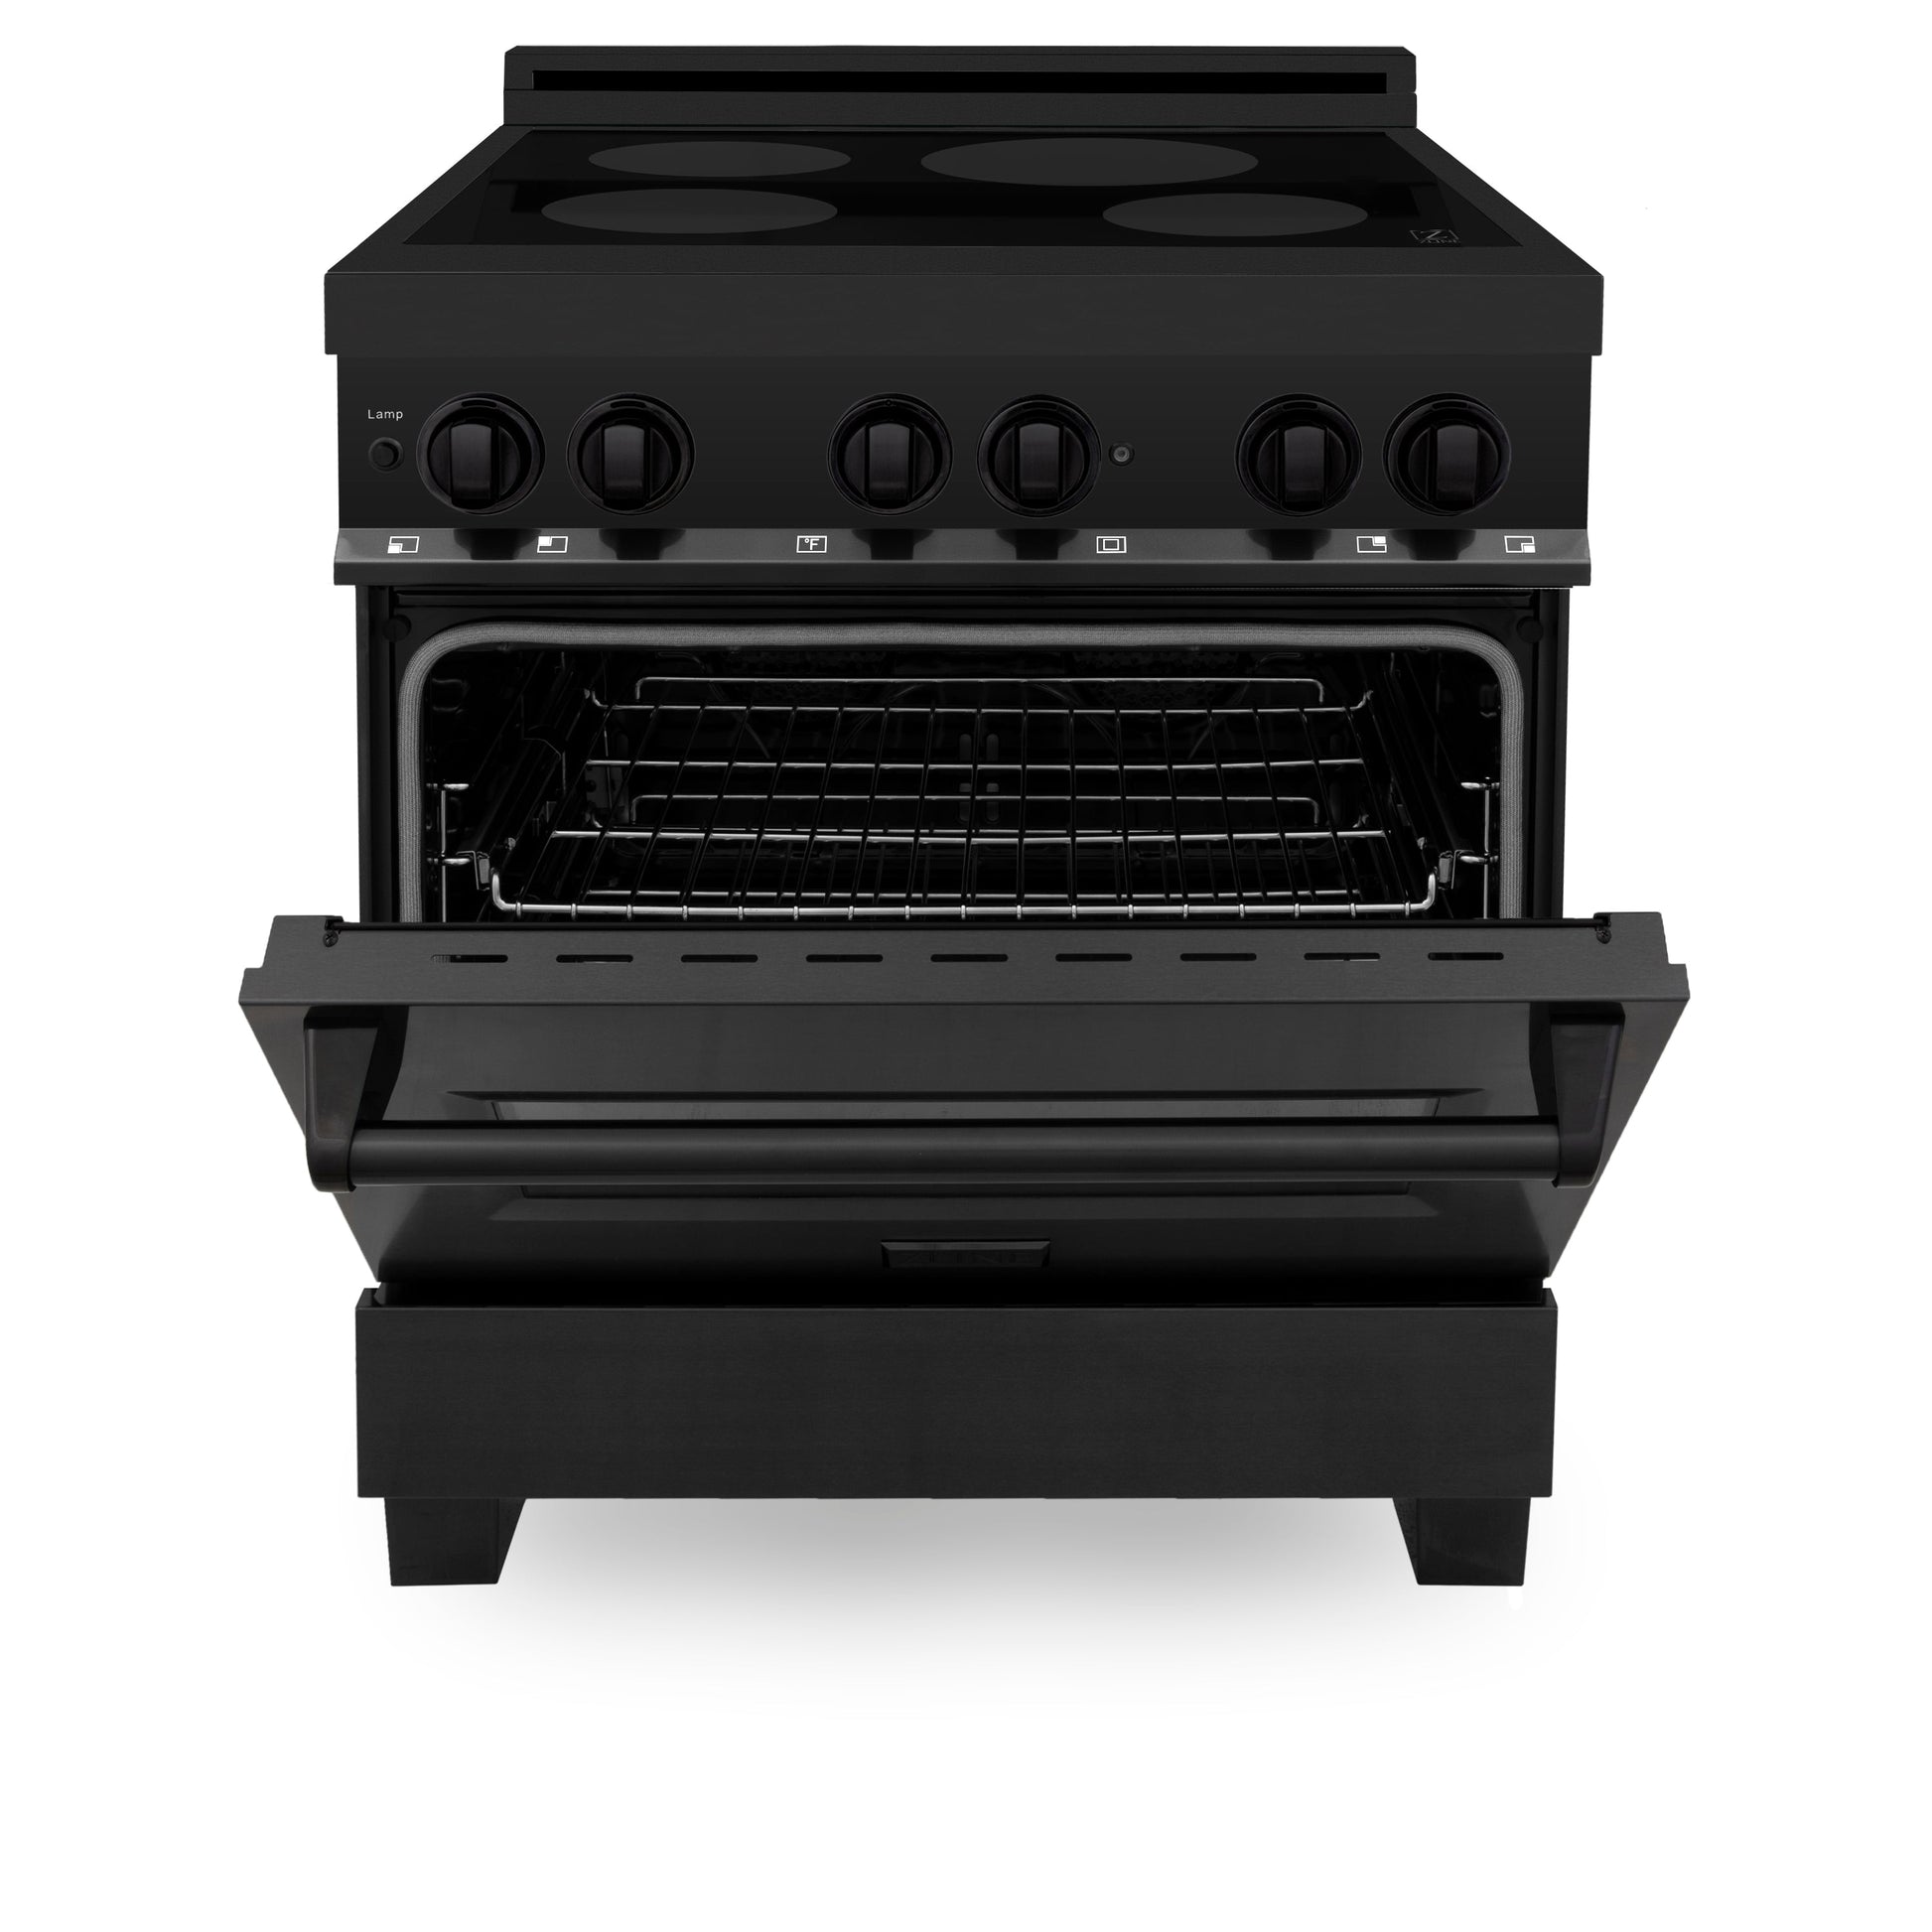 ZLINE 30" Induction Range with 4 Element Stove and Electric Oven - Black Stainless Steel